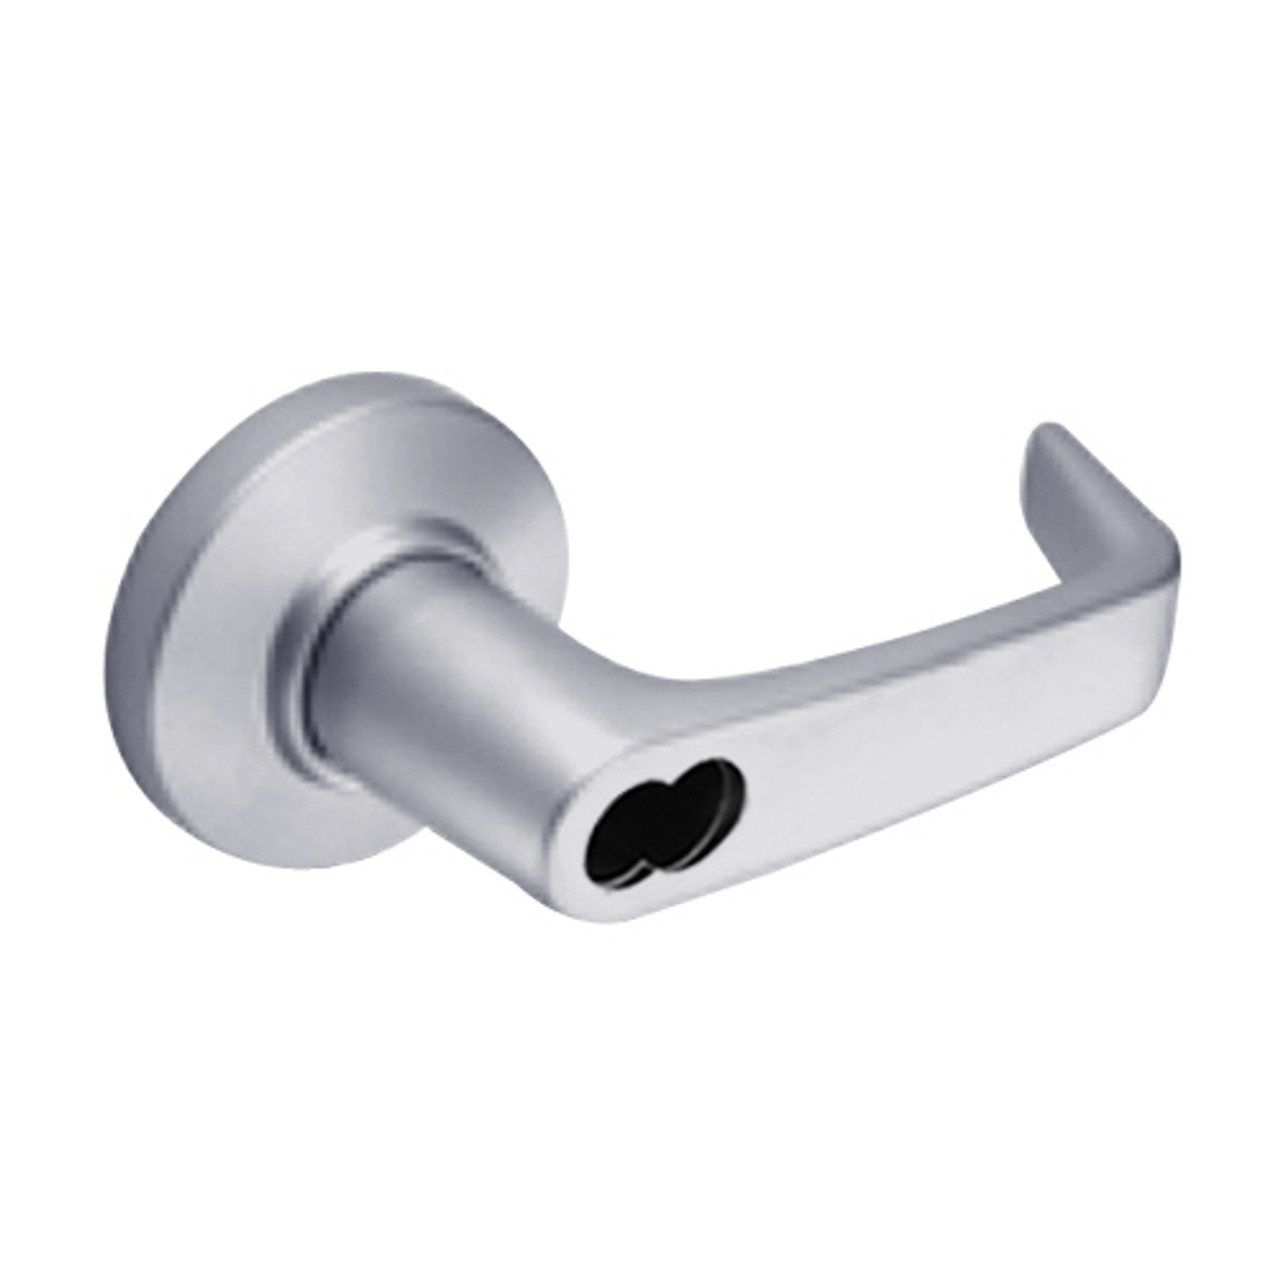 9K57D15CS3626 Best 9K Series Storeroom Cylindrical Lever Locks with Contour Angle with Return Lever Design Accept 7 Pin Best Core in Satin Chrome